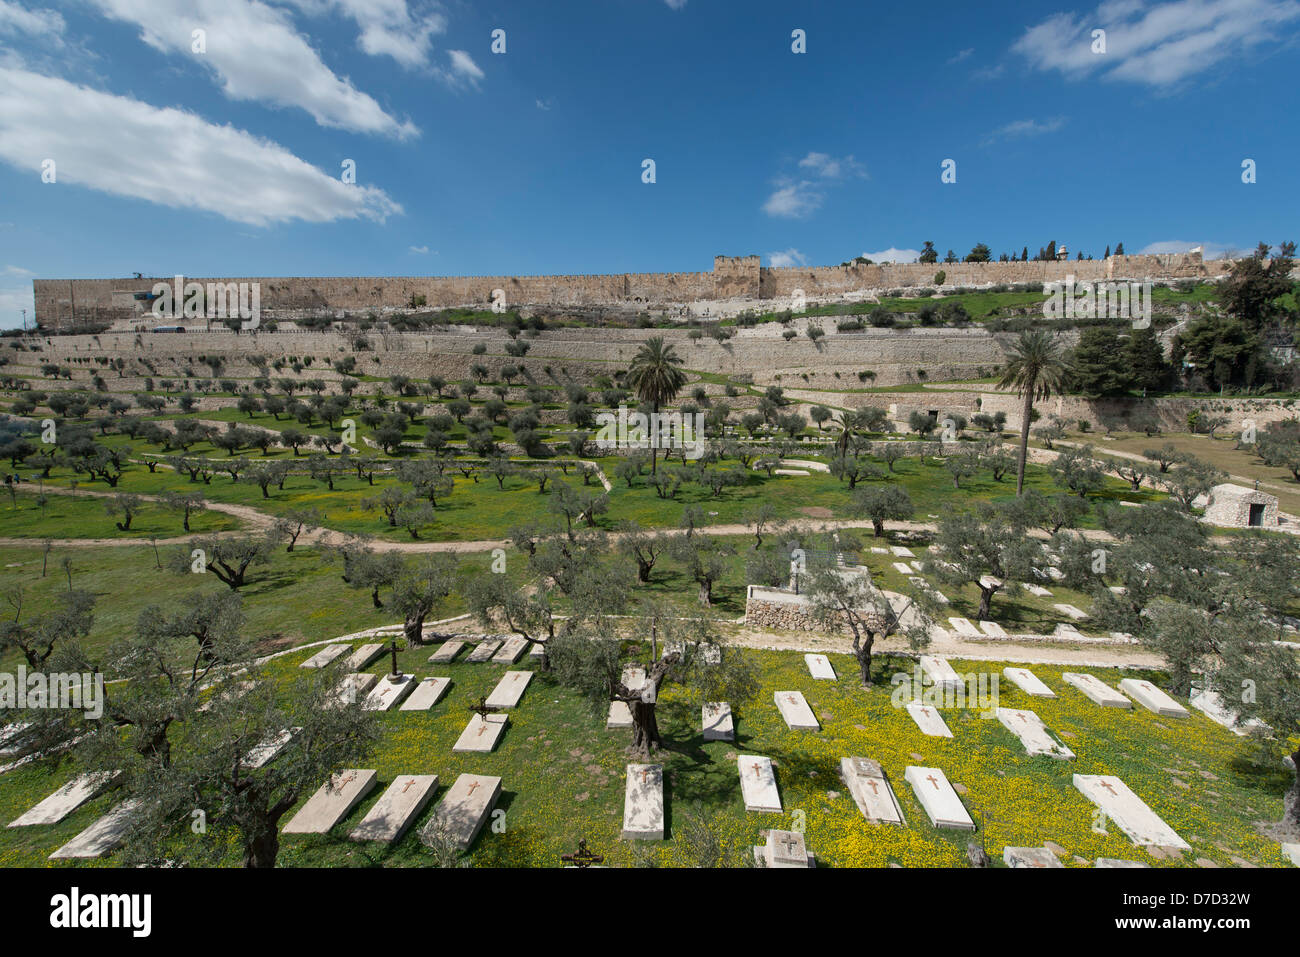 The Christian cemetery on the slopes of the Mount of Olives outside the city walls of Old Jerusalem Stock Photo